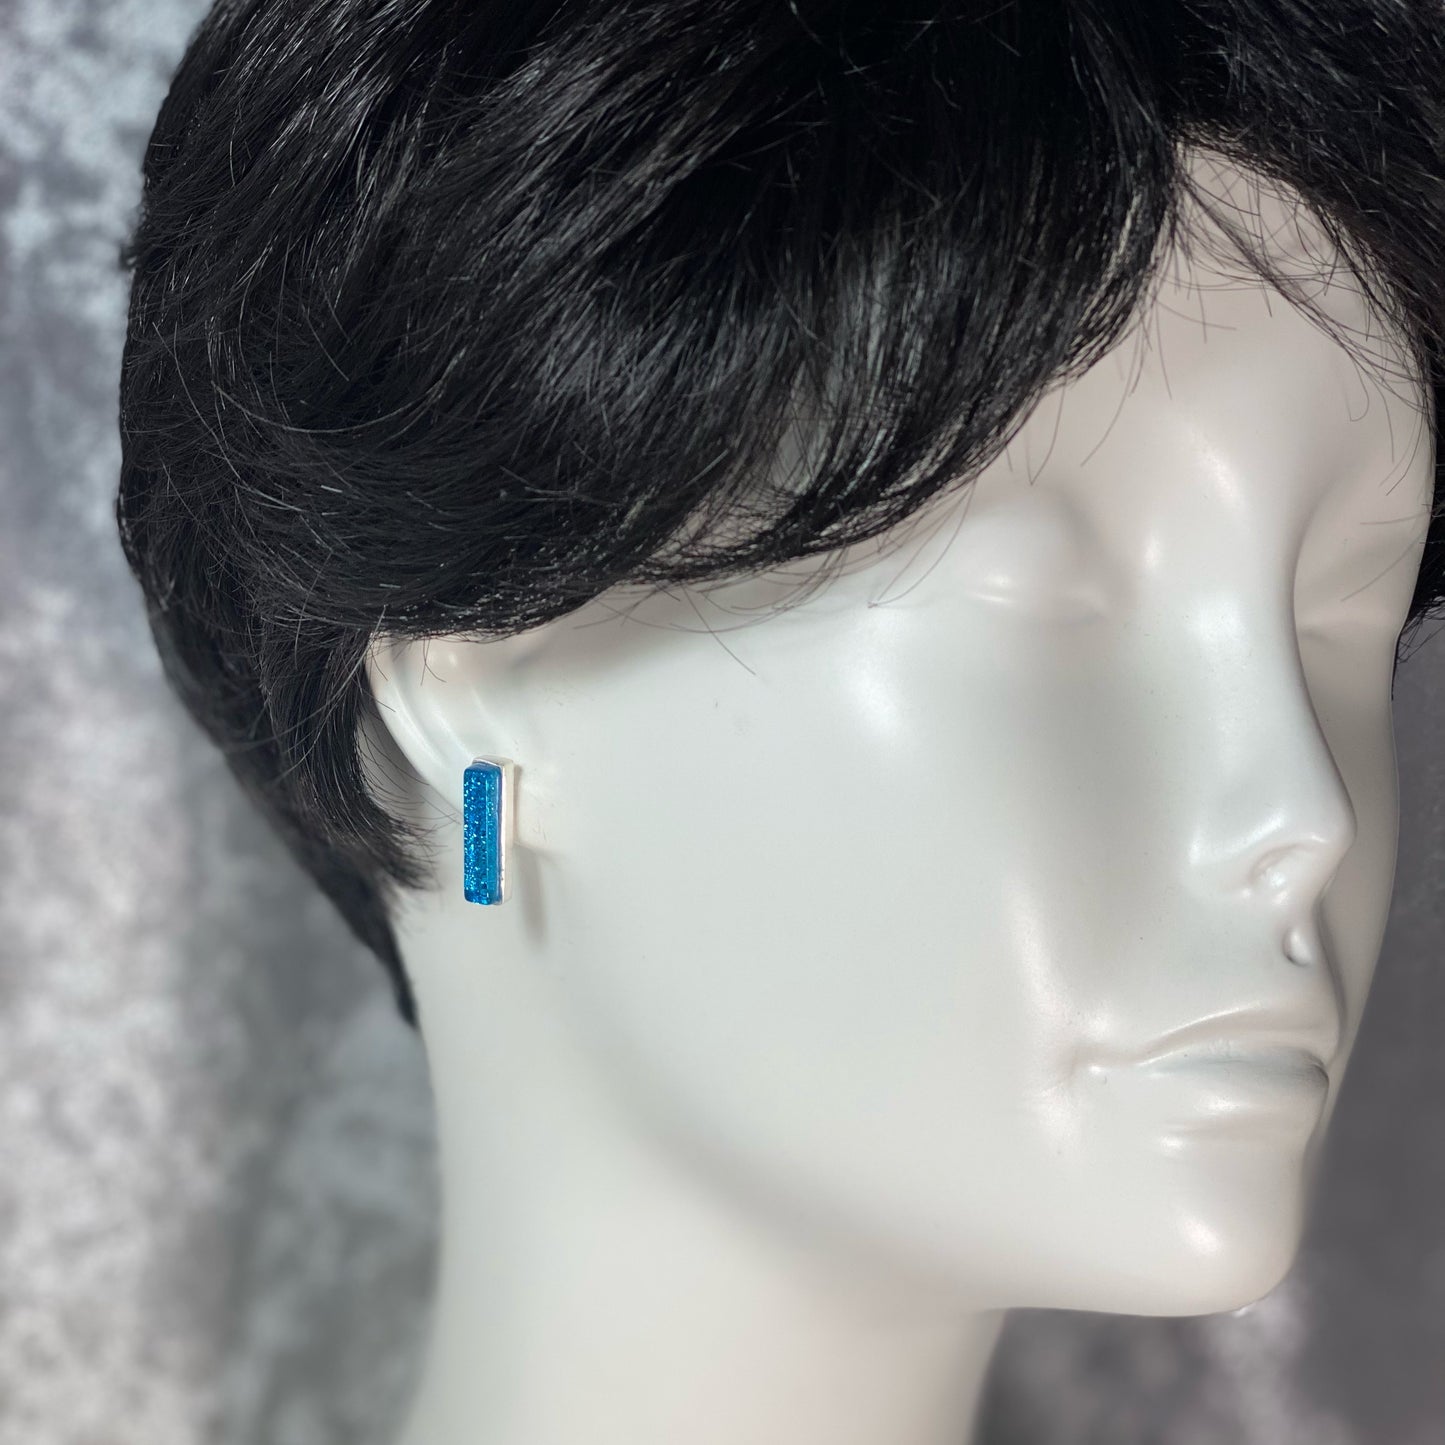 silver blue, rectangle post earrings, fused glass, glass jewelry, glass and silver jewelry, handmade, handcrafted, American Craft, hand fabricated jewelry, hand fabricated jewellery, Athen, Georgia, colorful jewelry, sparkle, bullseye glass, dichroic glass, art jewelry